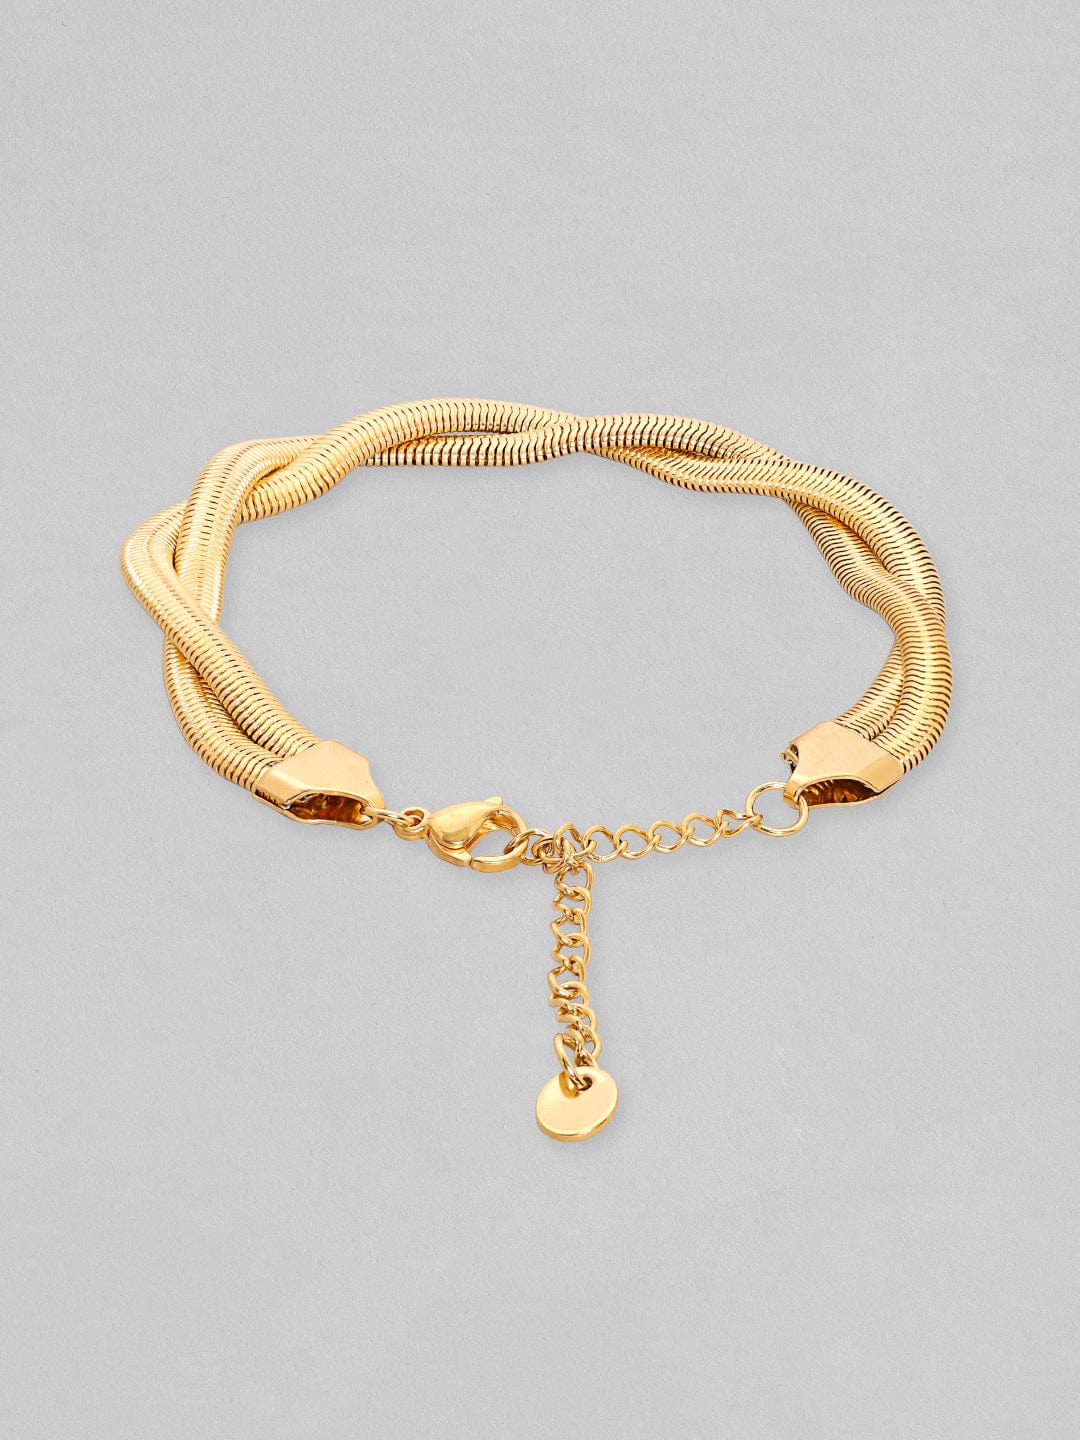 Gold Stainless Steel Rope Chain Bracelet Mens Twist Chian 18K Gold Plated   Social Ketchup